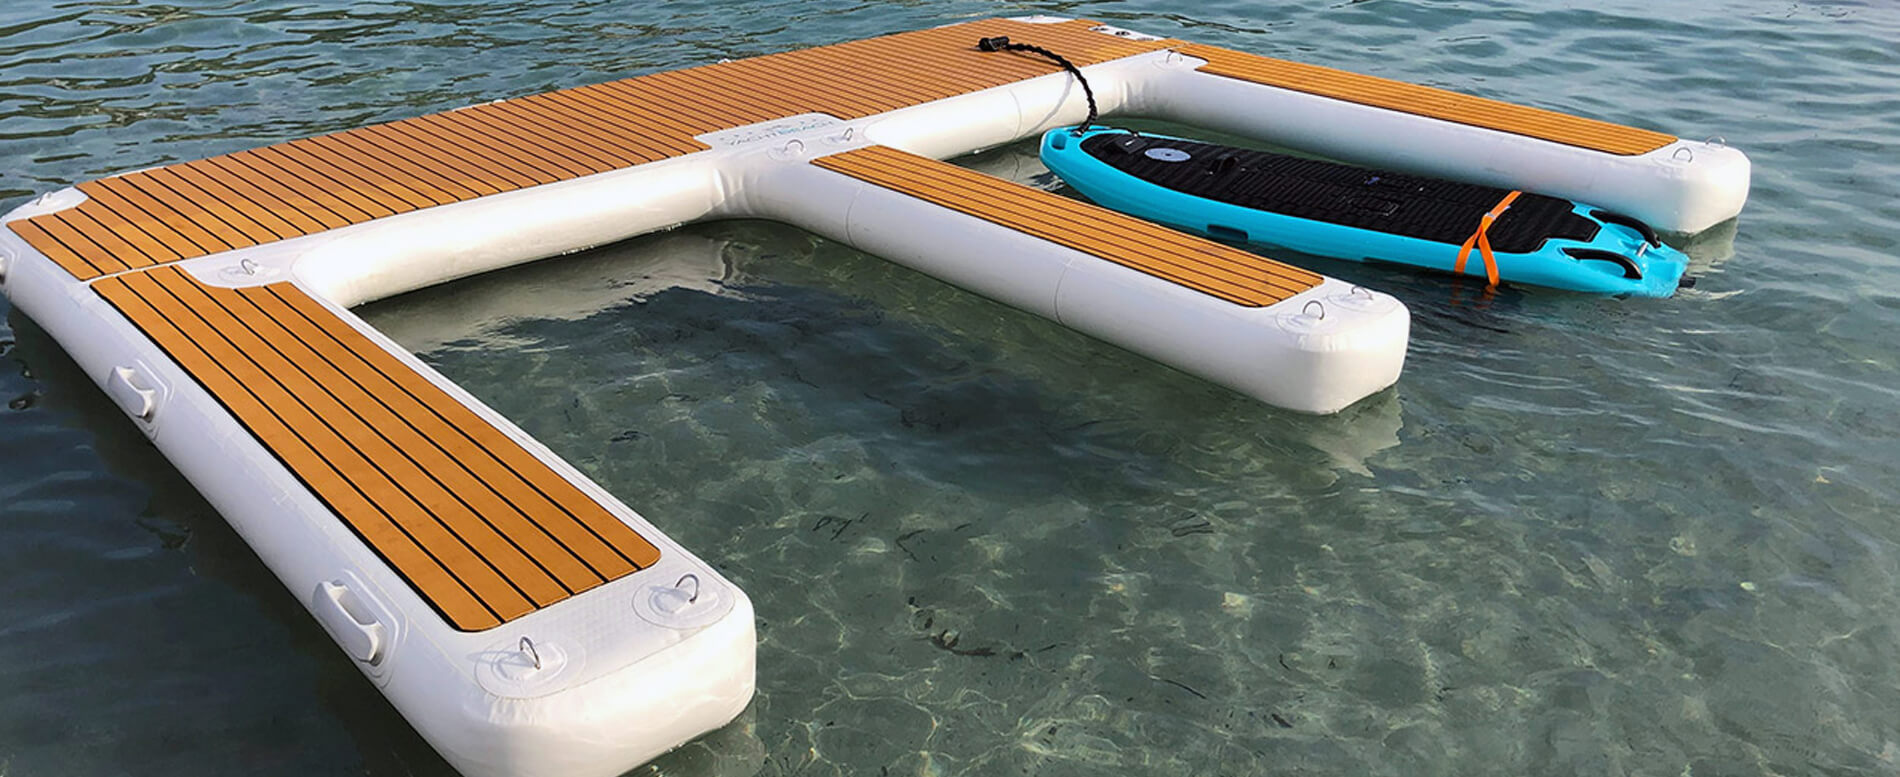 10 Best Inflatable Docks You Need To Add To Your Kit For Ultimate